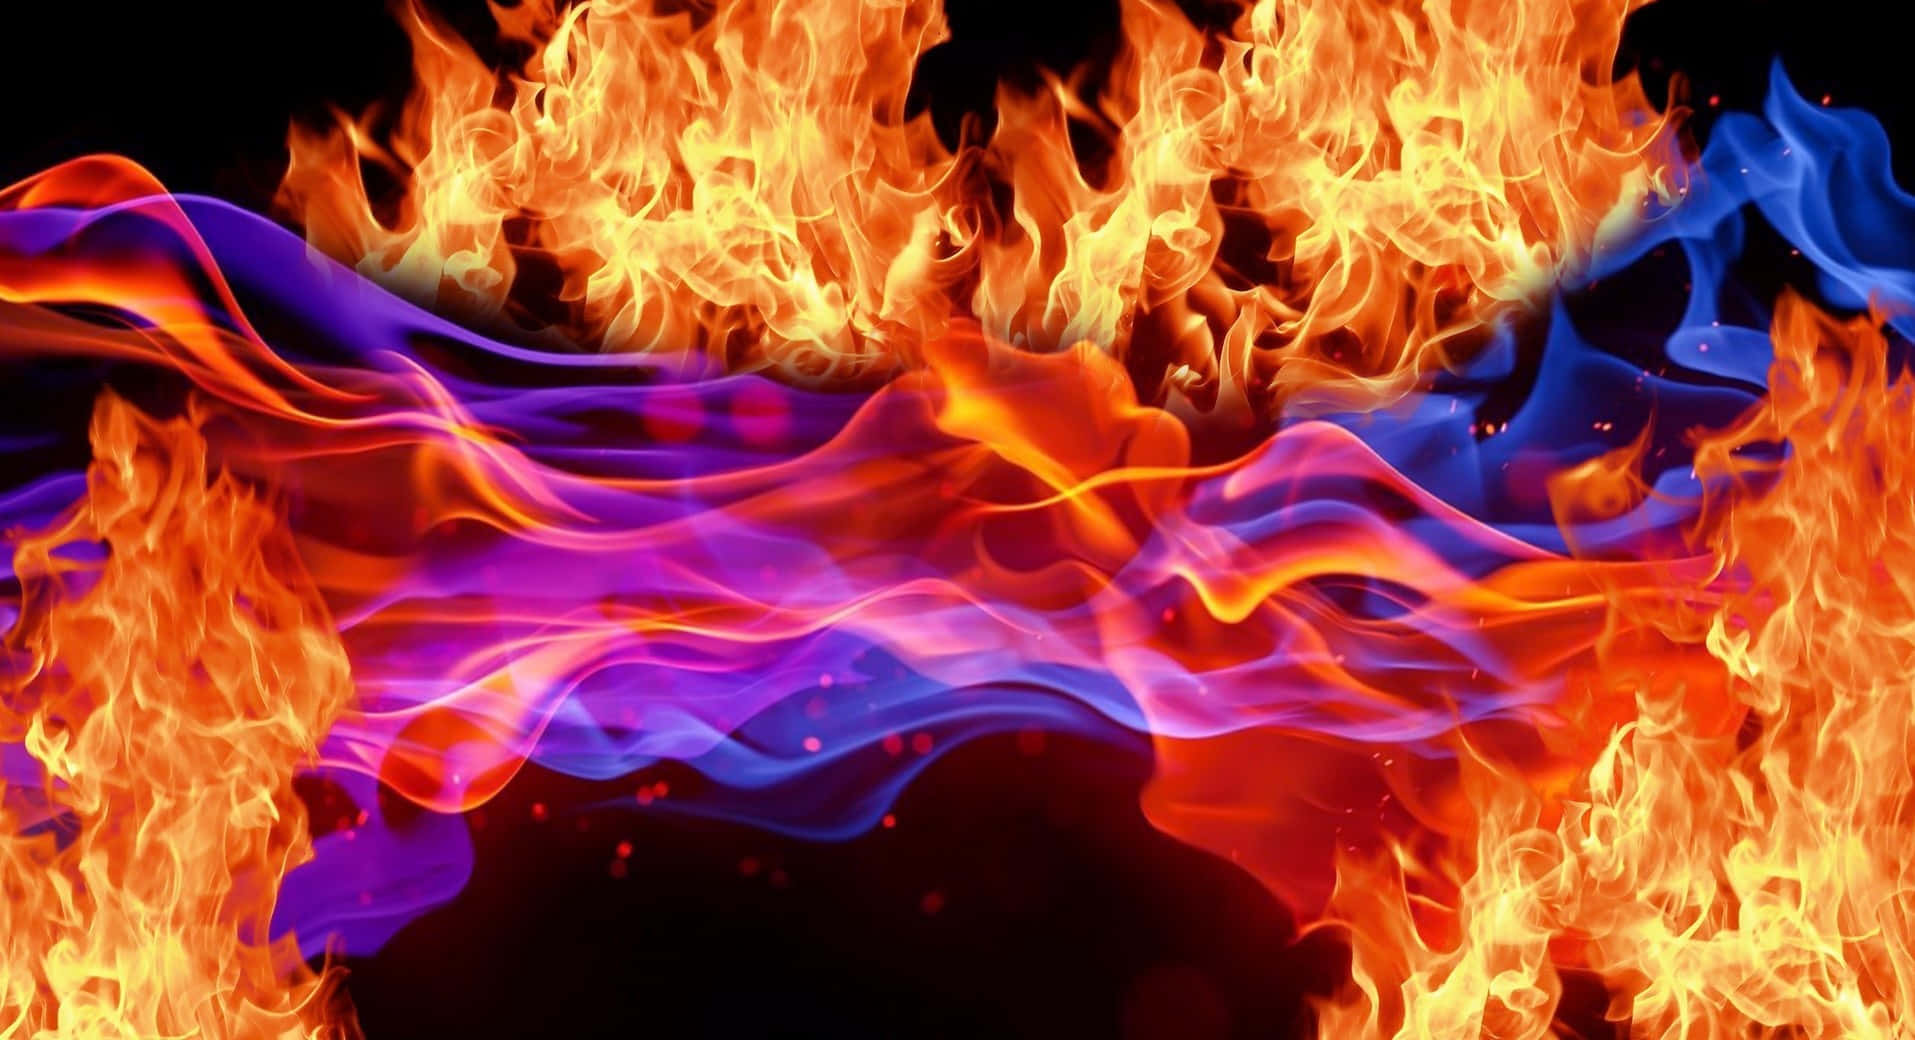 Unearthly sci-fi vision of mesmerizing purple fire